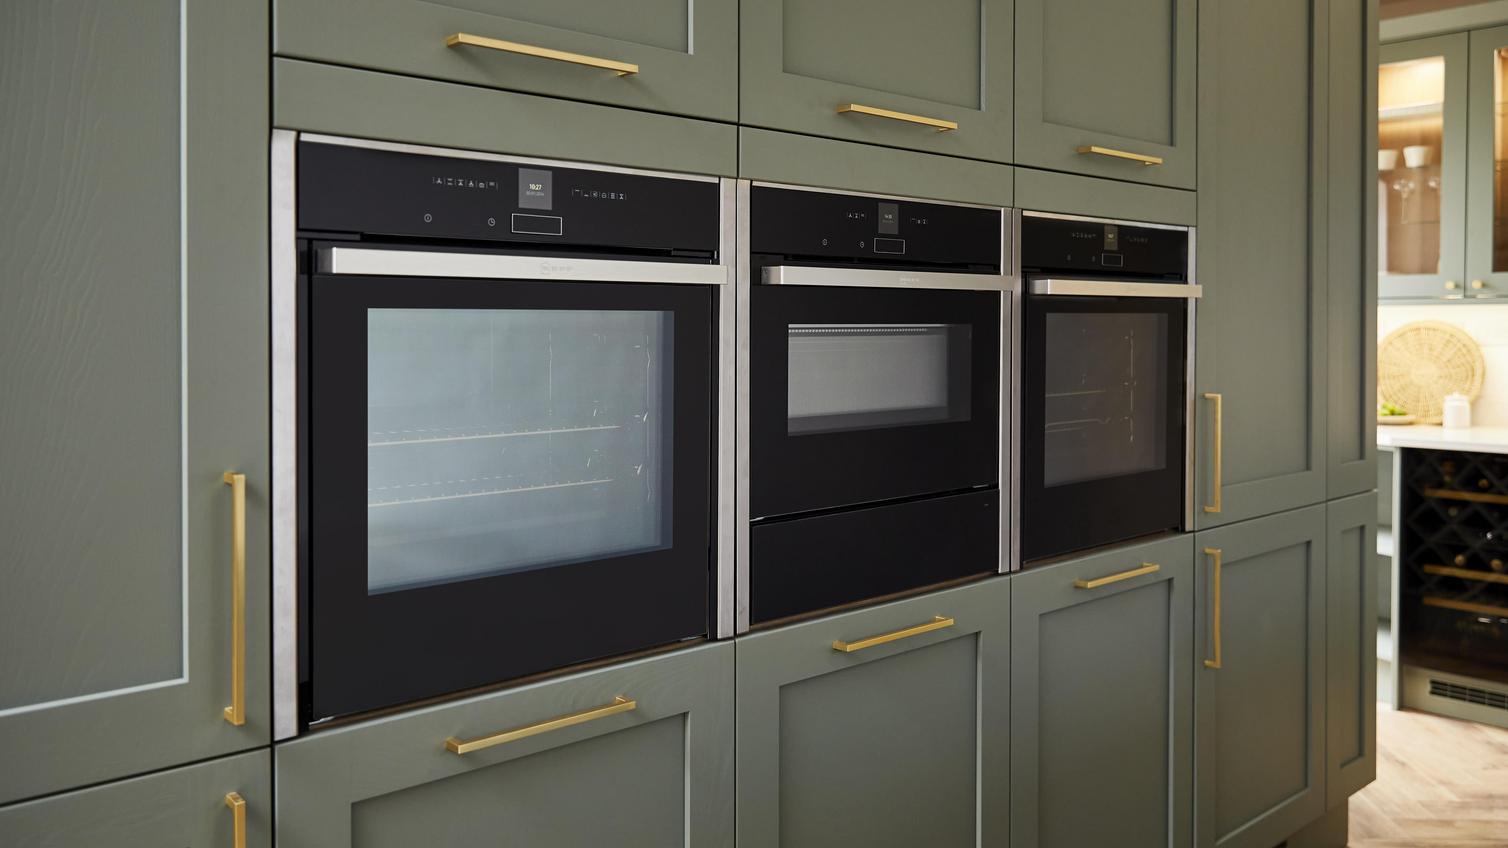 Sage green shaker kitchen with brushed brass bar handles and three built in ovens on tower units.